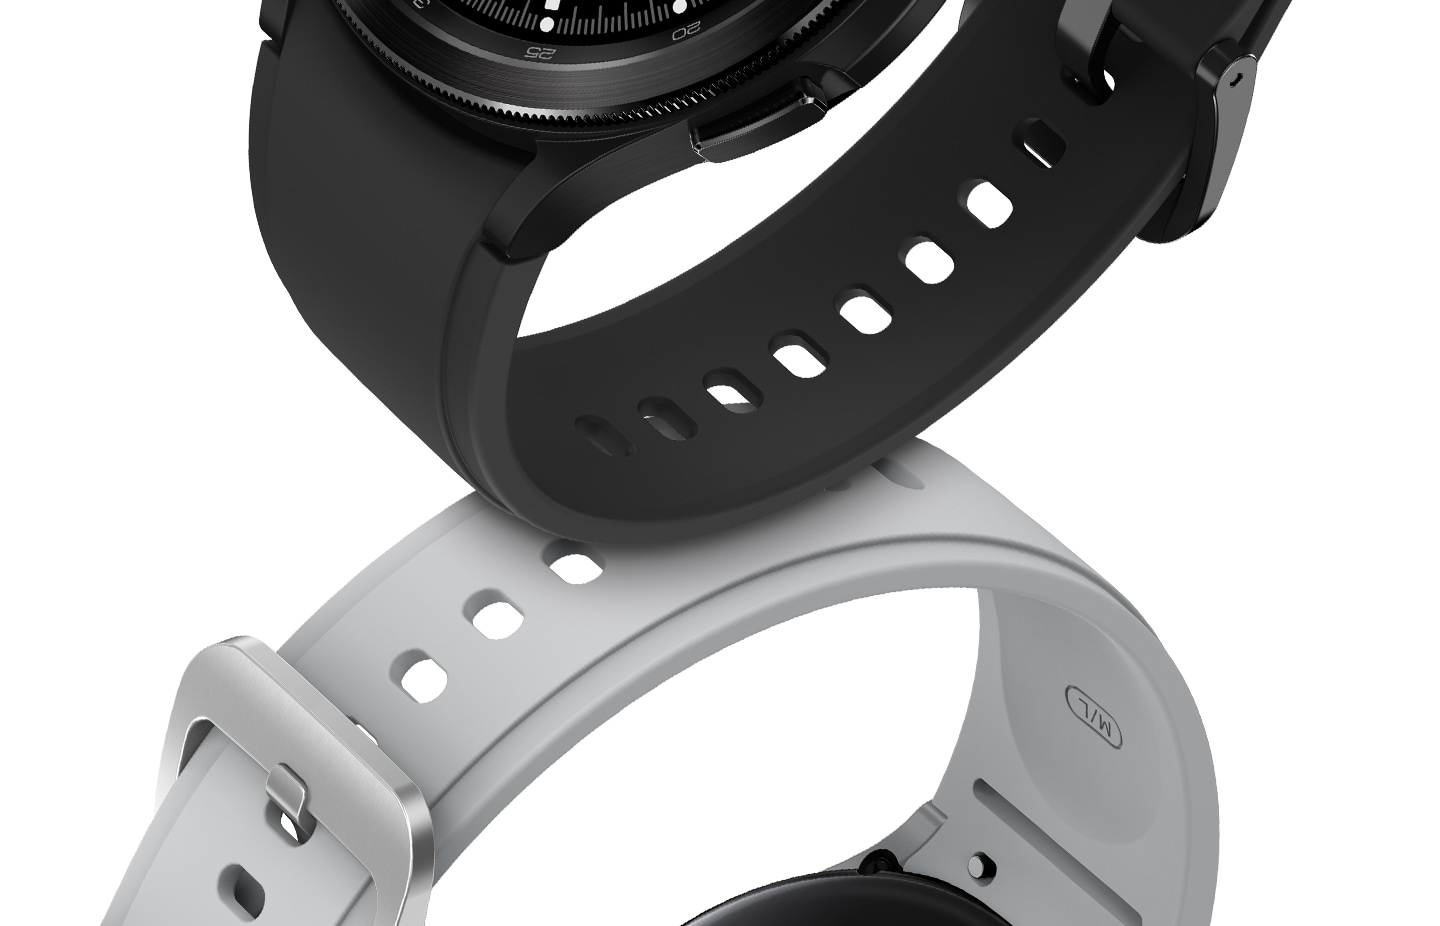 A Galaxy Watch4 with a Gray color Ridge band is shown on top. On the bottom is another Galaxy Watch4 with a Black color Ridge band.